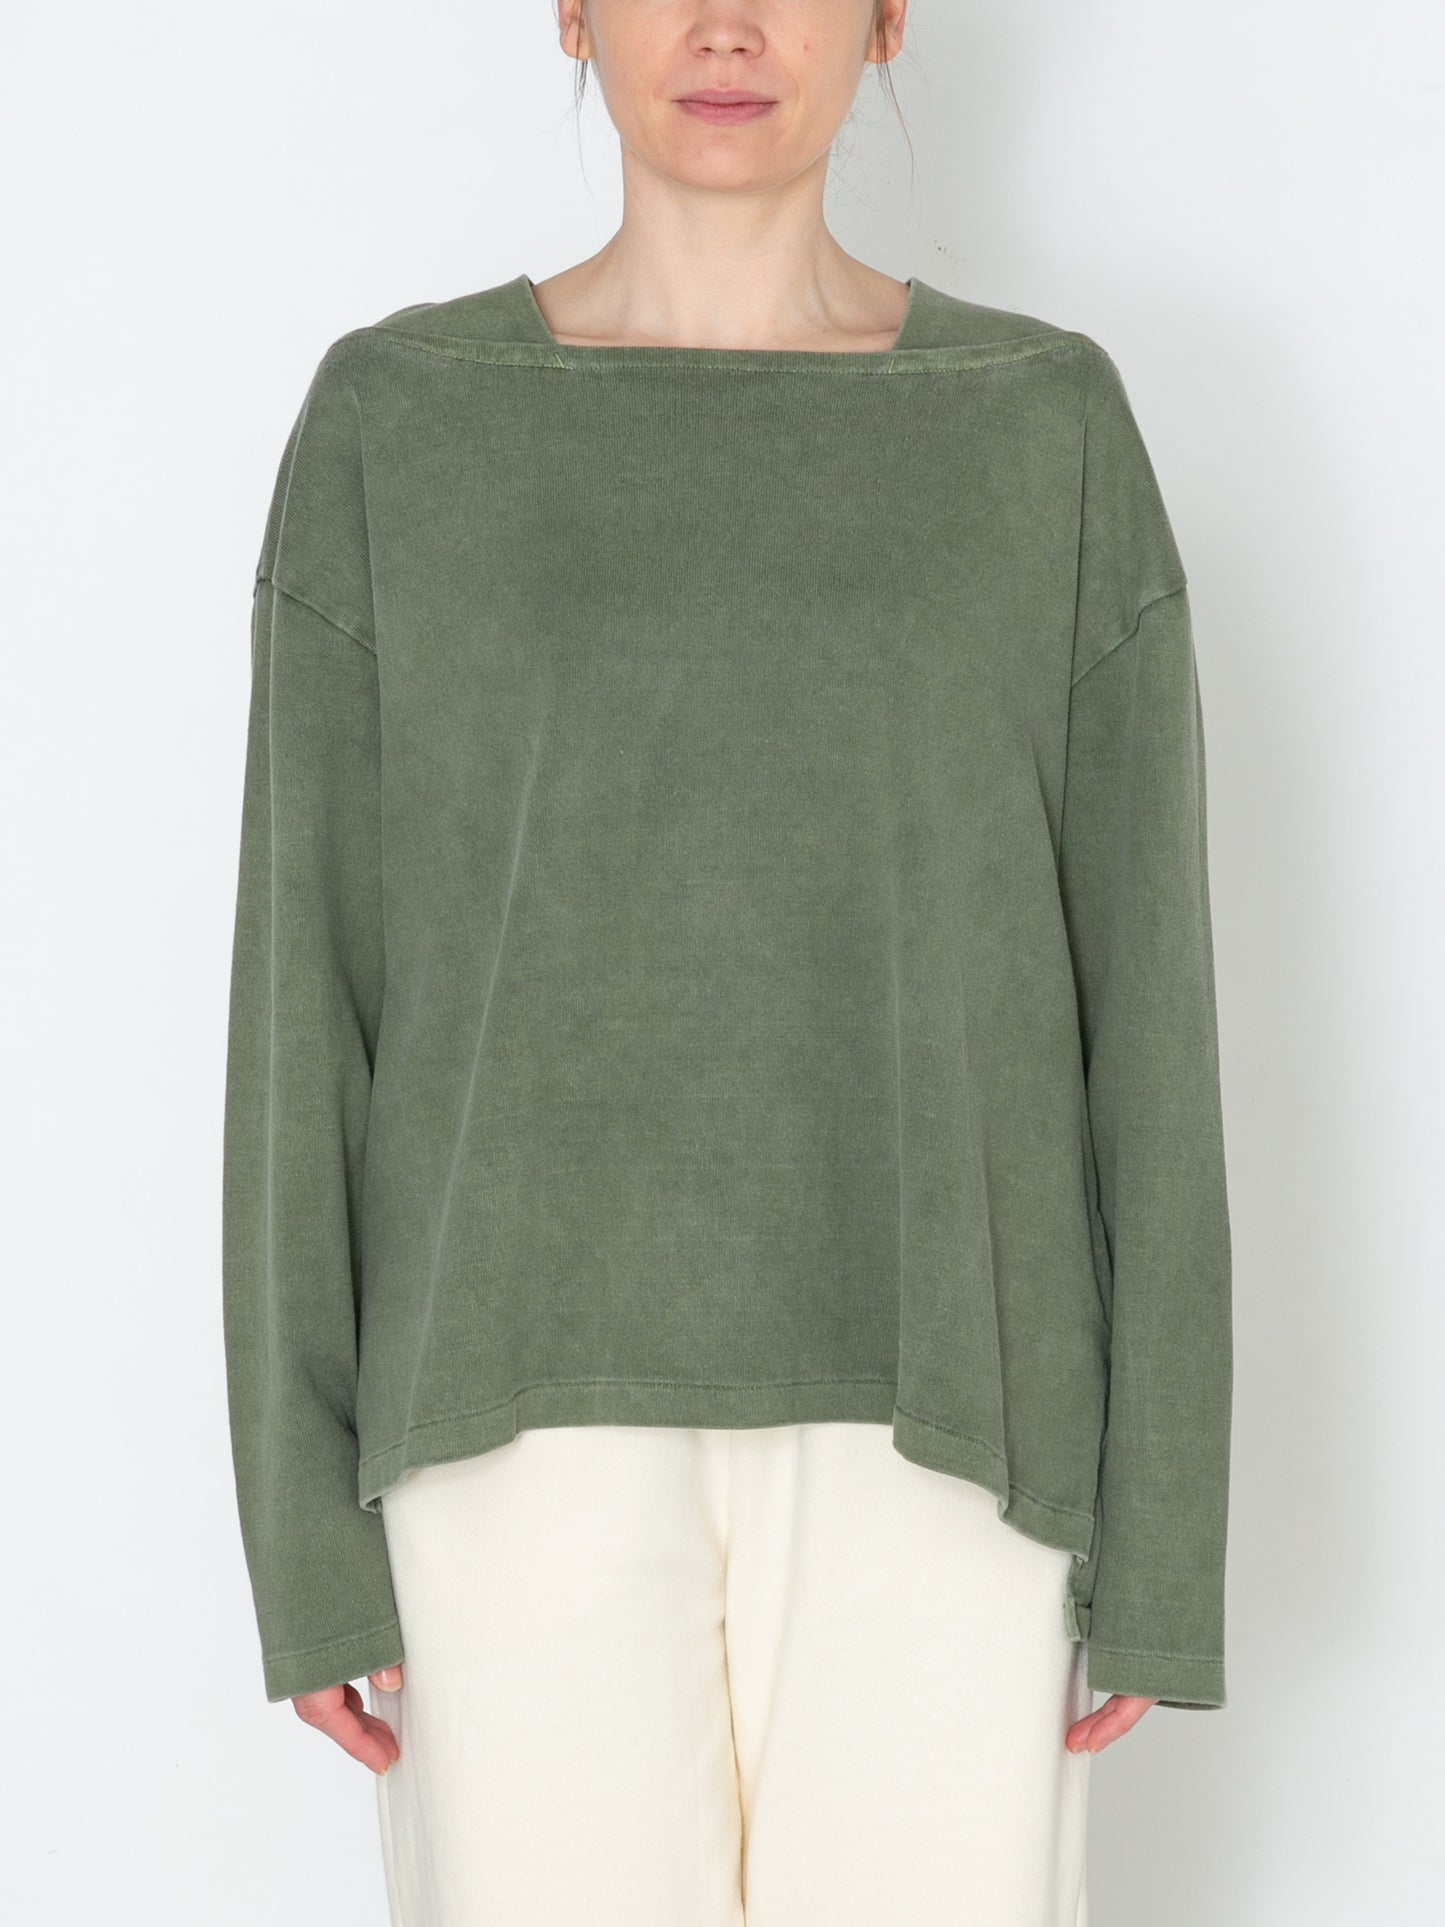 BAGGY BOAT L/S TEE COTTON JERSEY AM-C0107 Olive